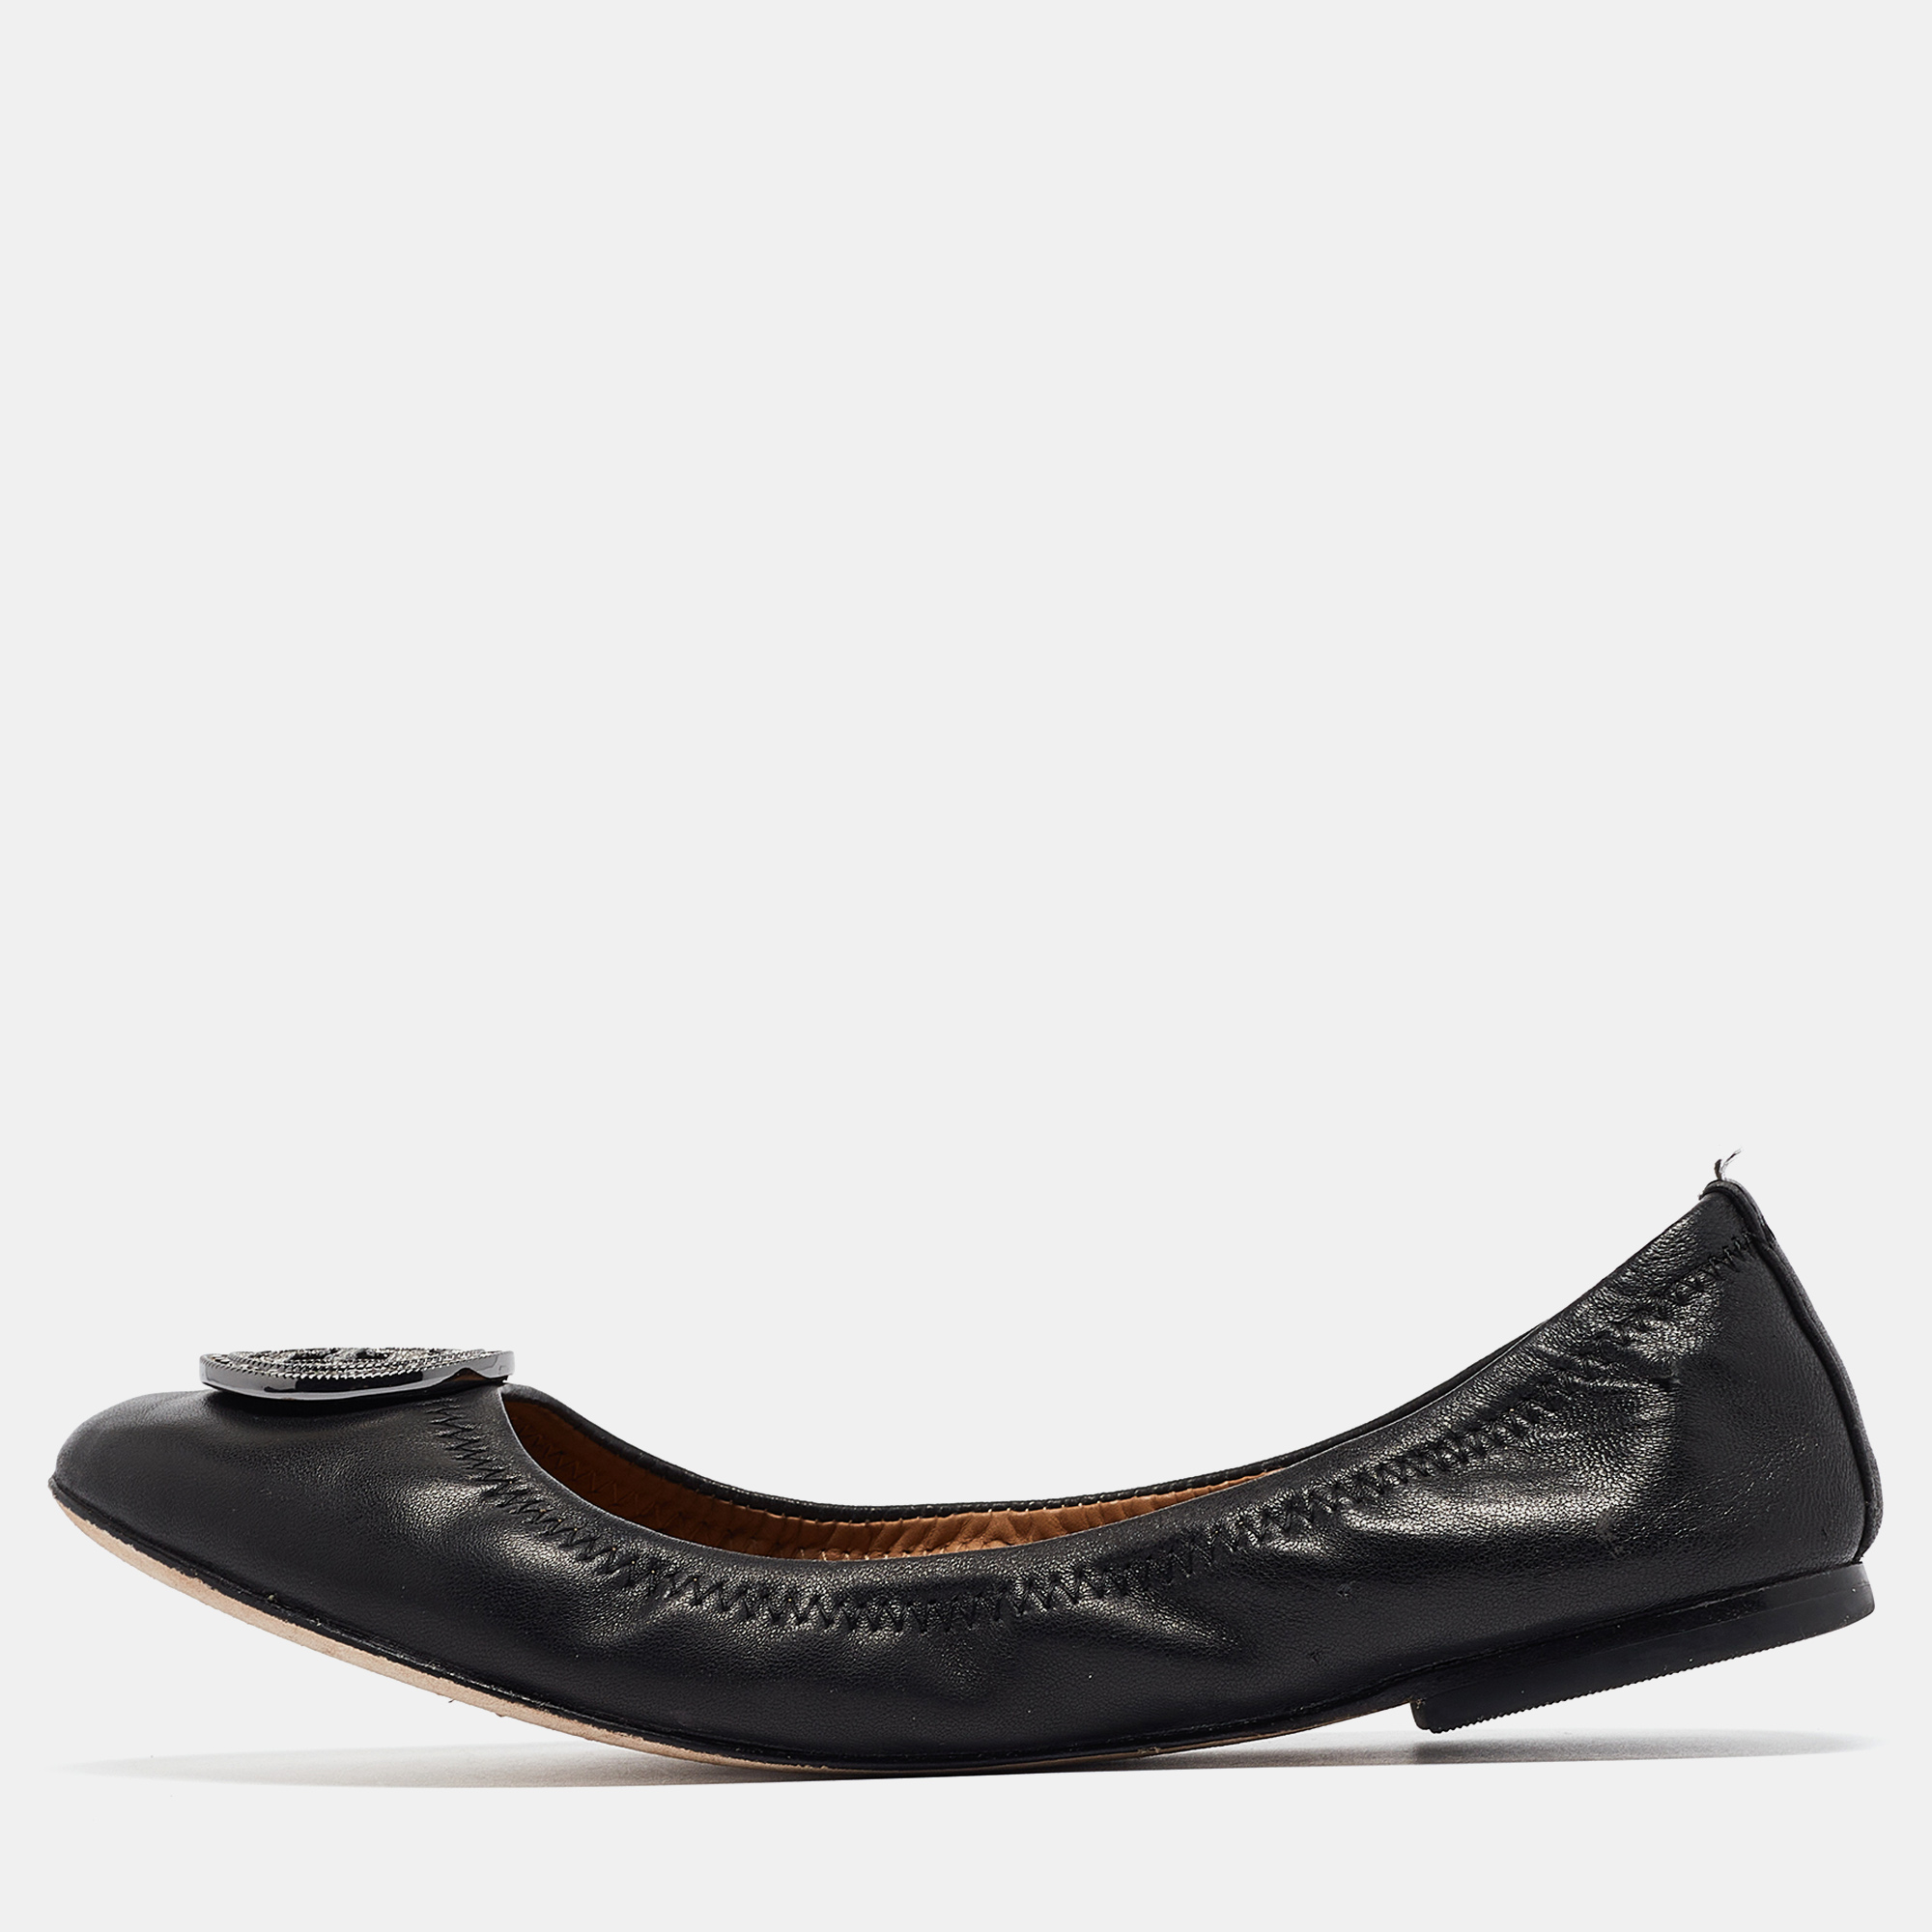 Pre-owned Tory Burch Black Leather Scrunch Ballet Flats Size 38